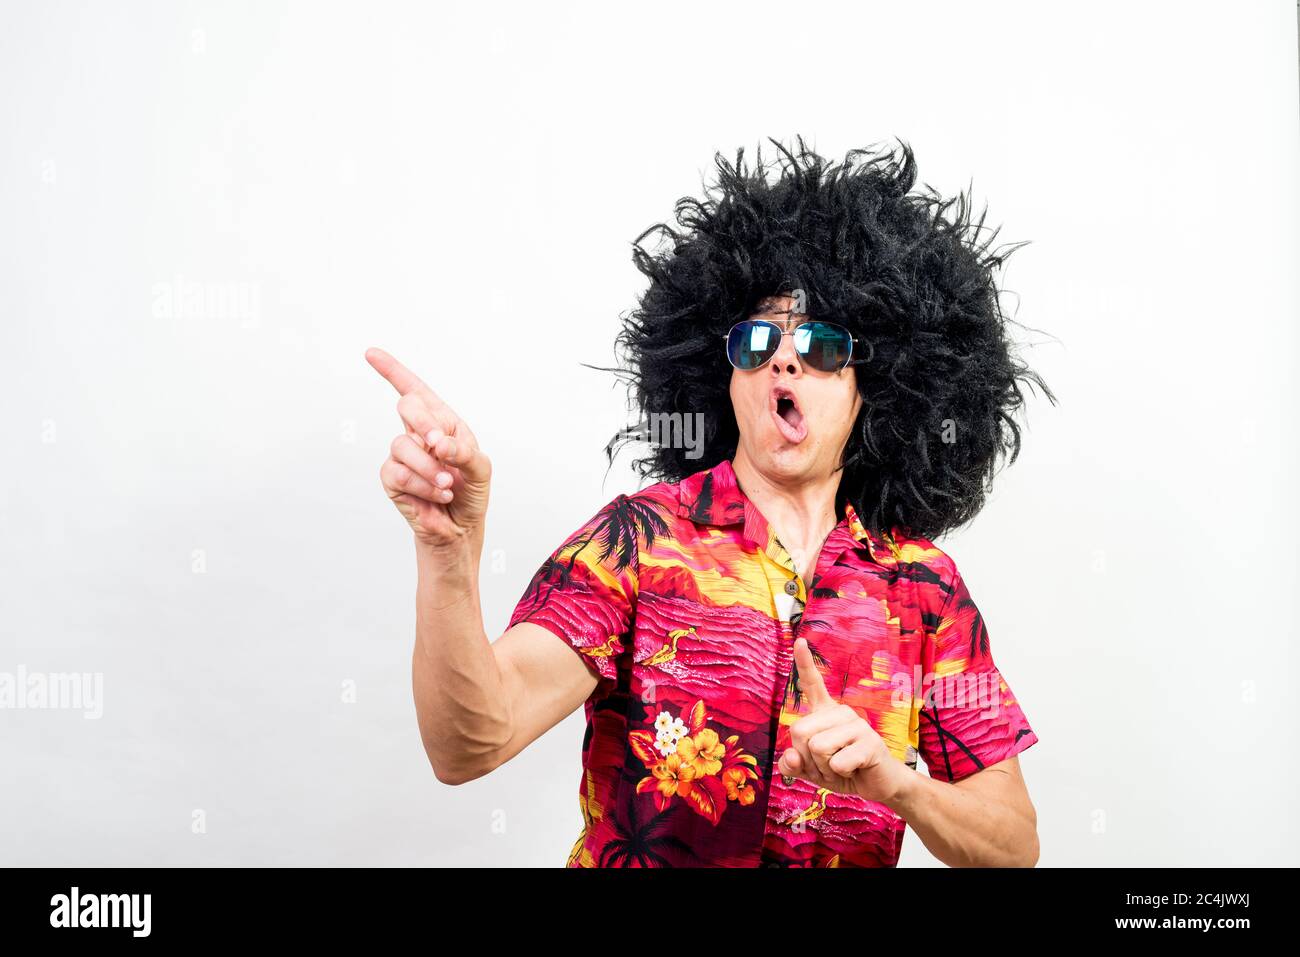 Man with afro wig, sunglasses and hawaiian shirt, very crazy. Mid shot. White background. Stock Photo